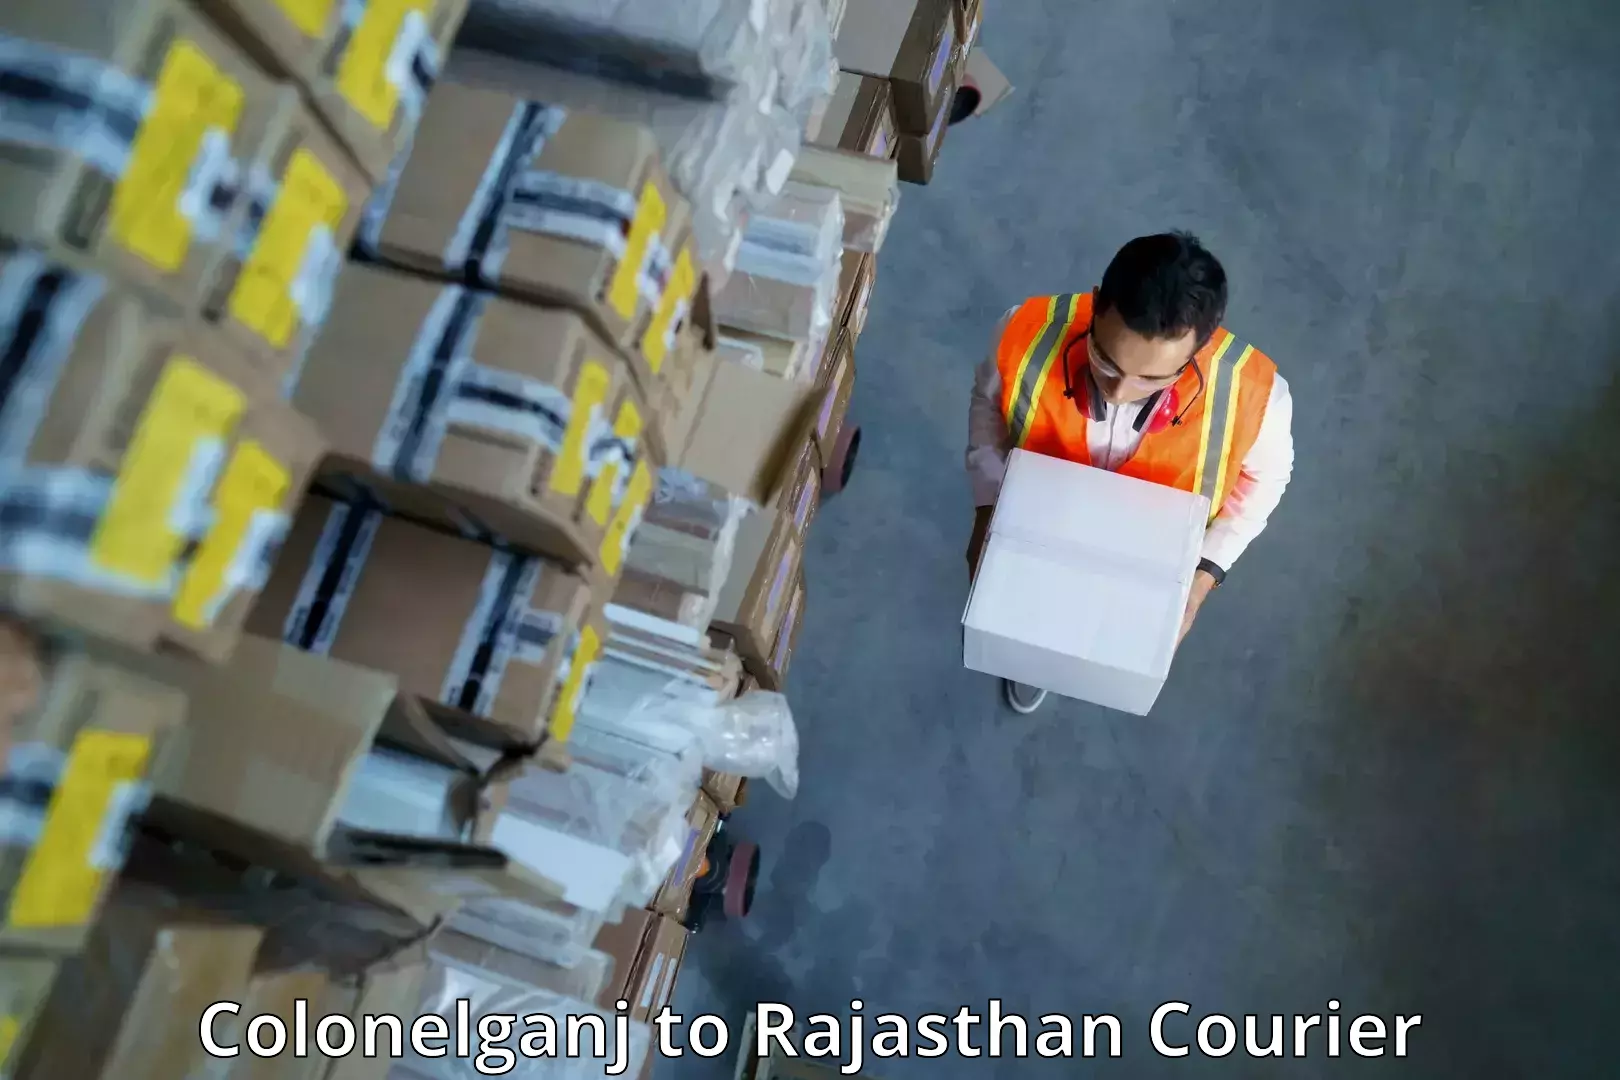 High-speed parcel service Colonelganj to Rajasthan